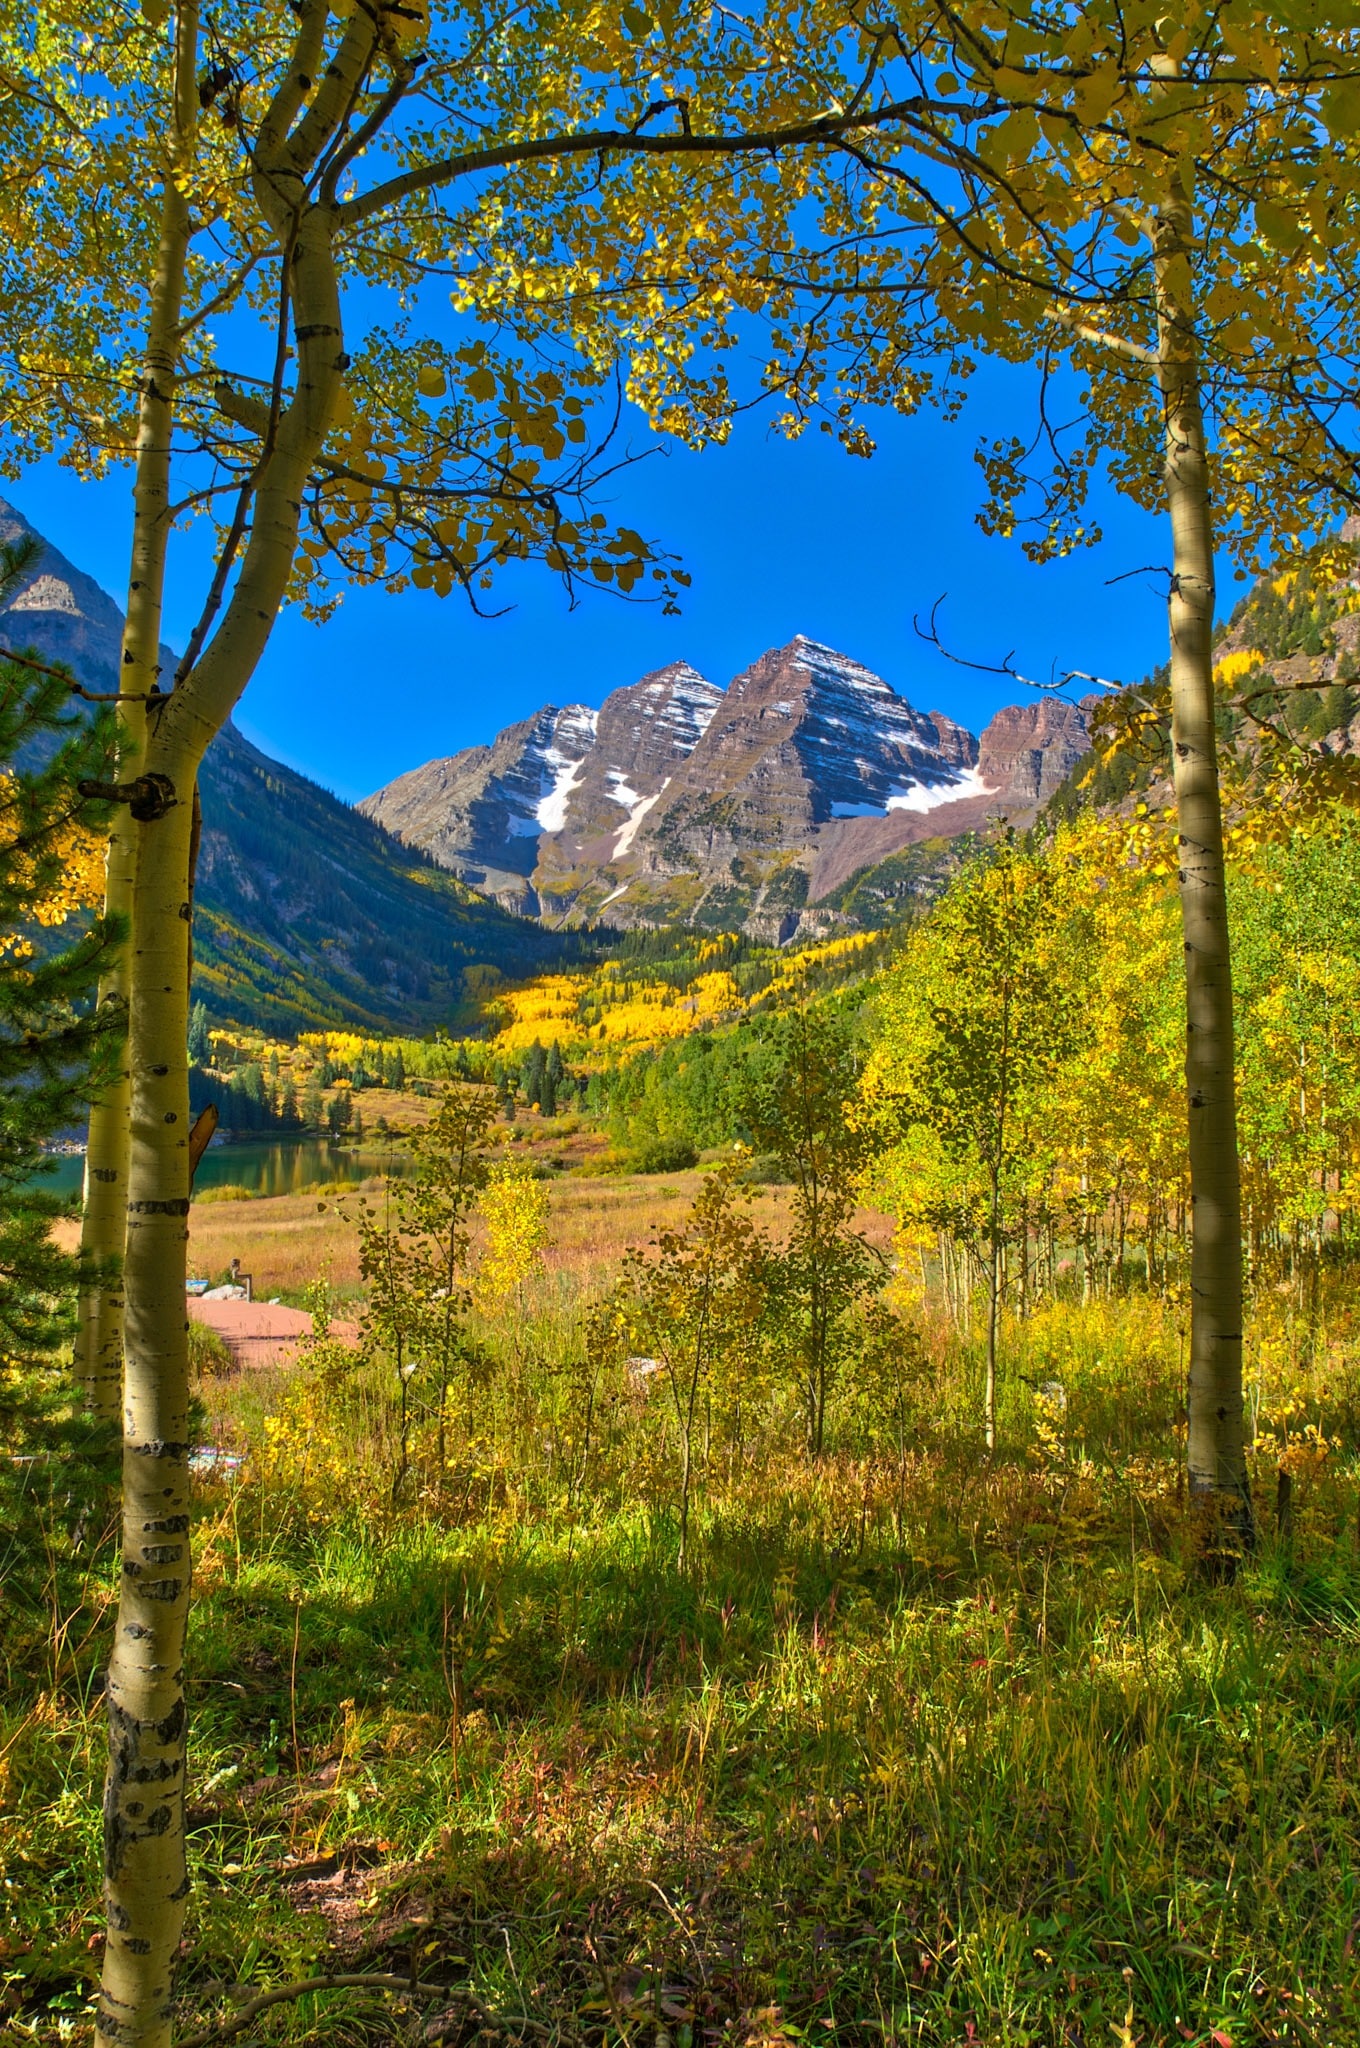 A view of the Maroon Bells in the crisp morning light in the Maroon Bells Recreation Area near Aspen, Colorado.